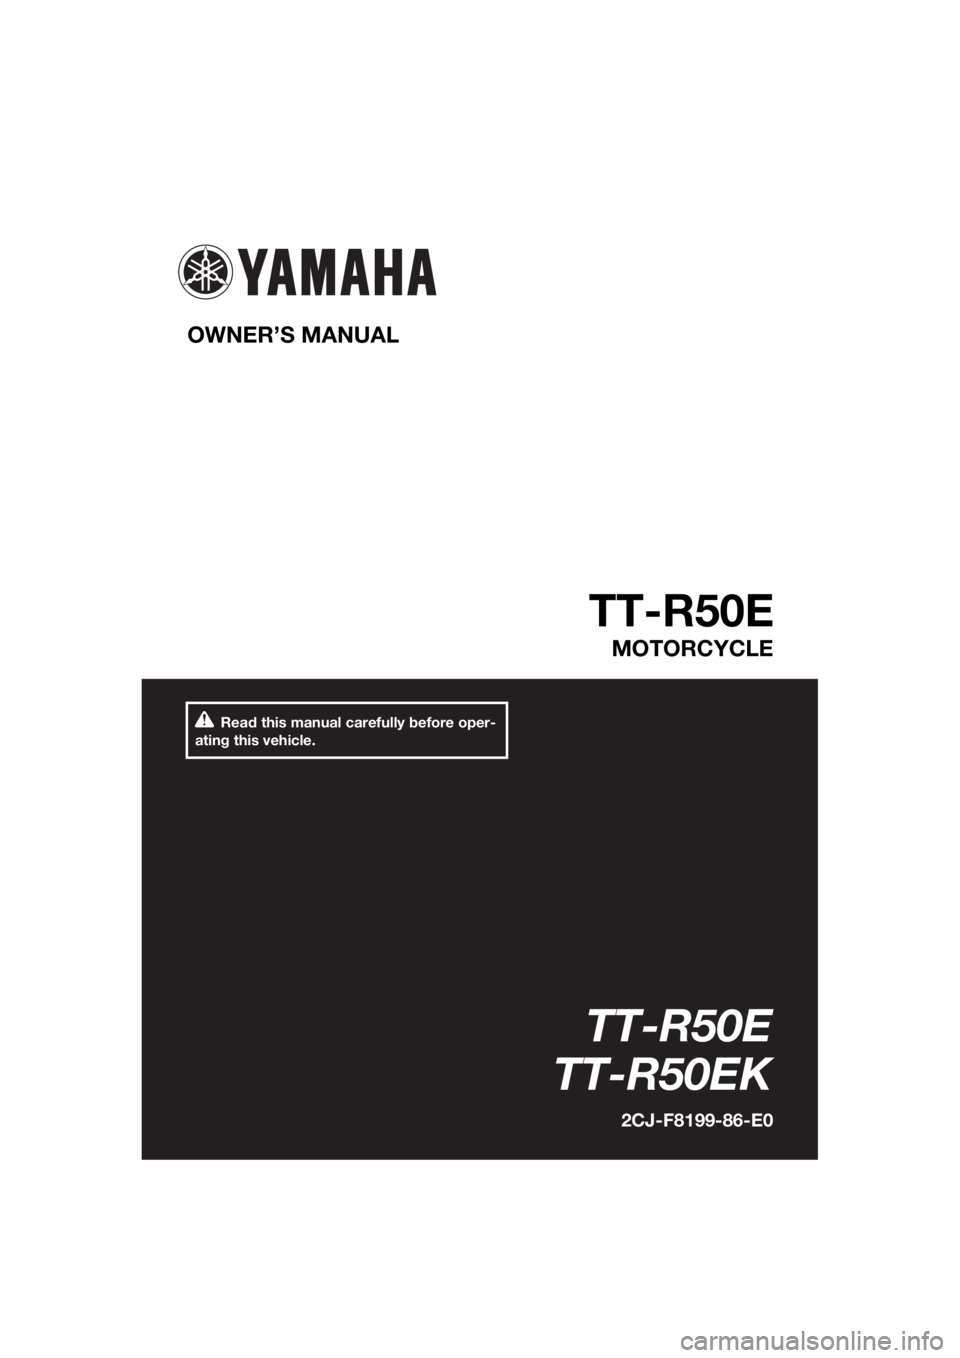 YAMAHA TT-R50E 2019  Owners Manual Read this manual carefully before oper-
ating this vehicle.
OWNER’S MANUAL 
TT-R50E
MOTORCYCLE
TT-R50E
TT-R50EK
2CJ-F8199-86-E0
U2CJ86E0.book  Page 1  Tuesday, June 26, 2018  10:28 AM 